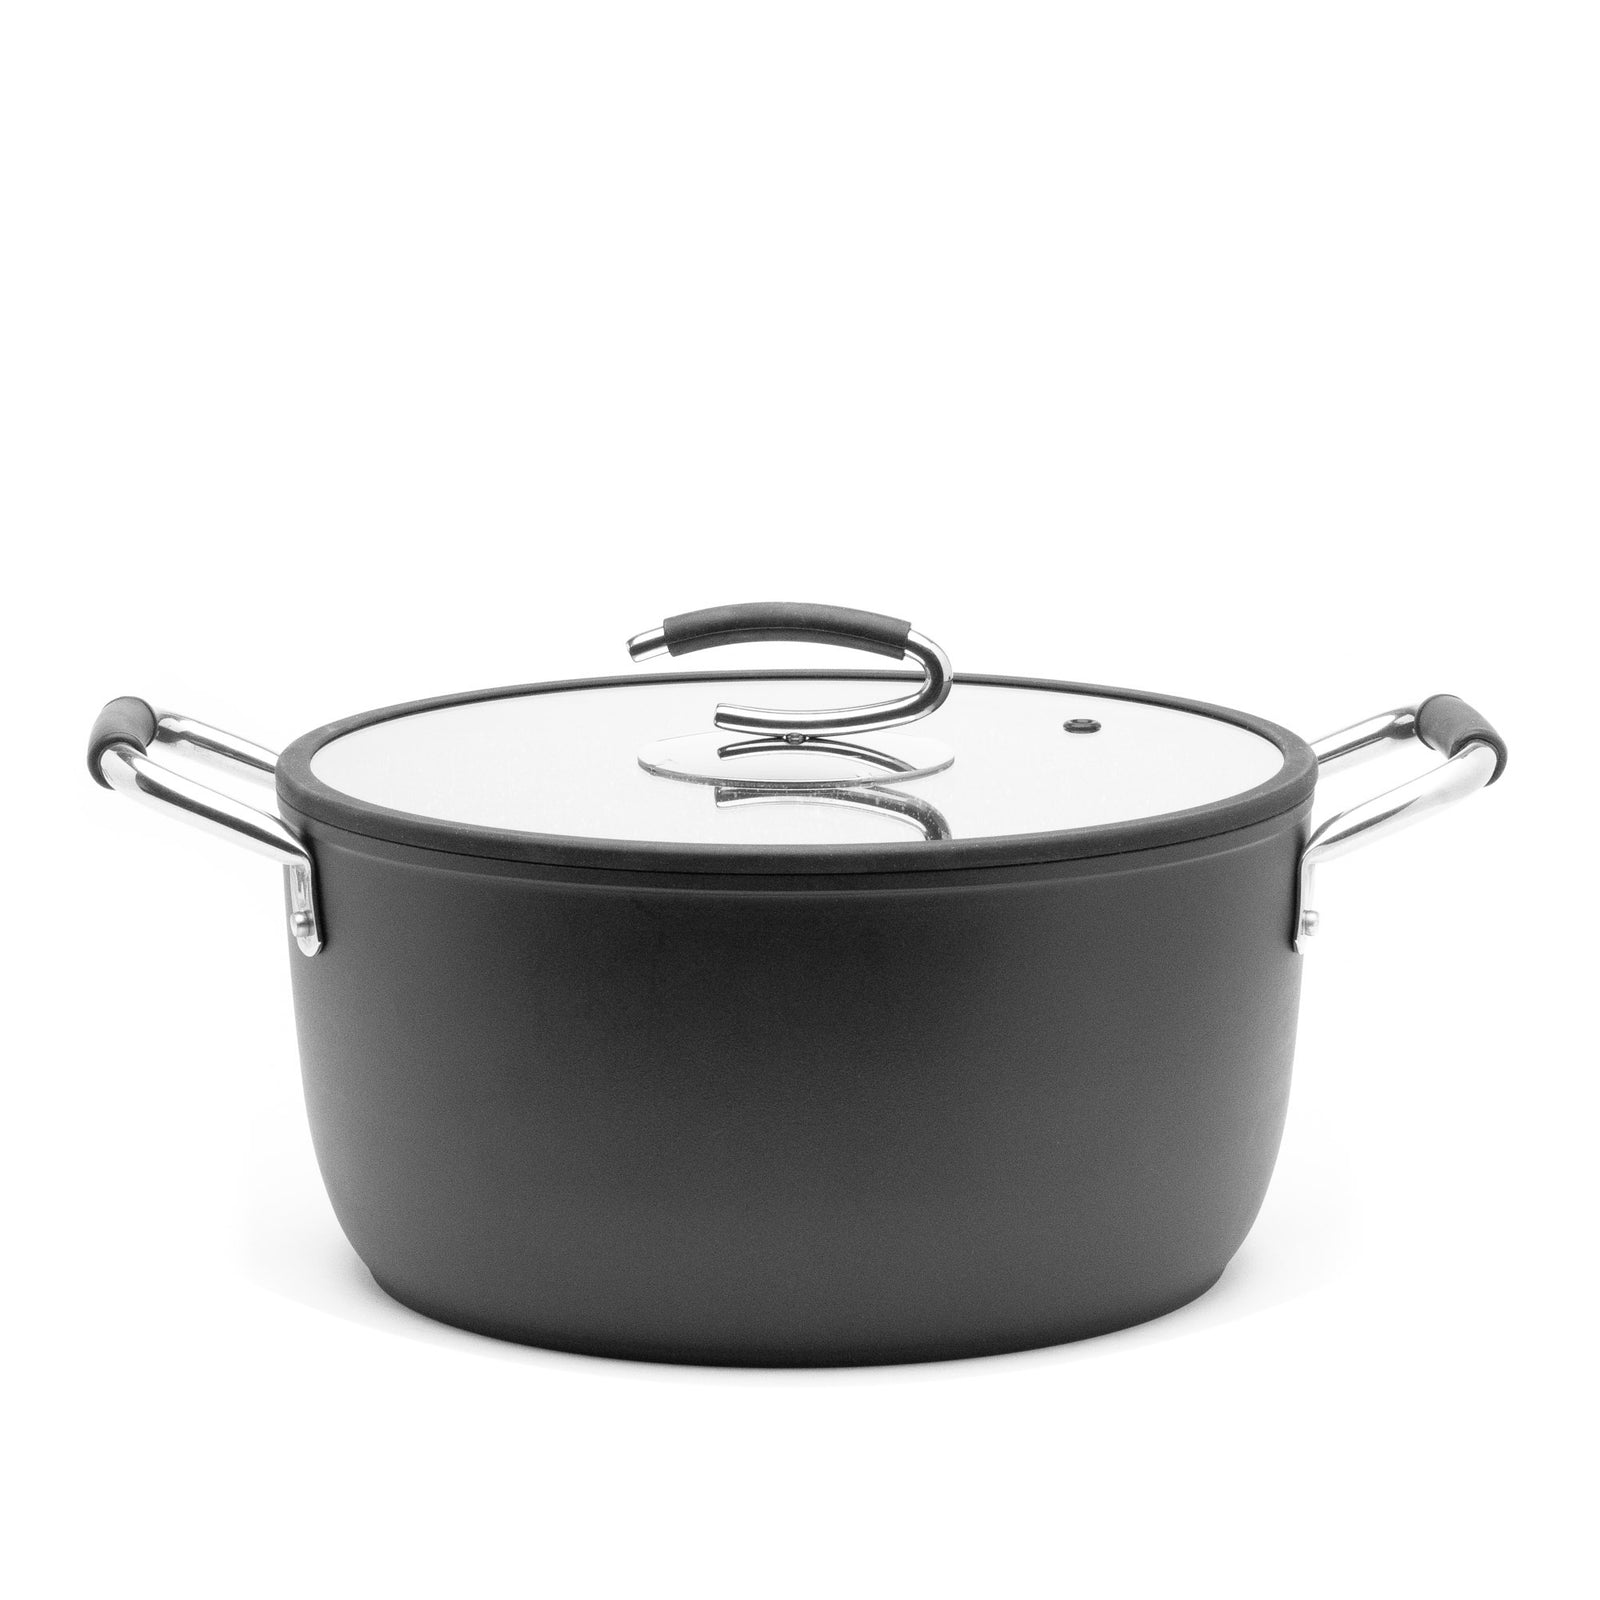 We Tested 28 Dutch Ovens, and Our Favorite Is Under $100